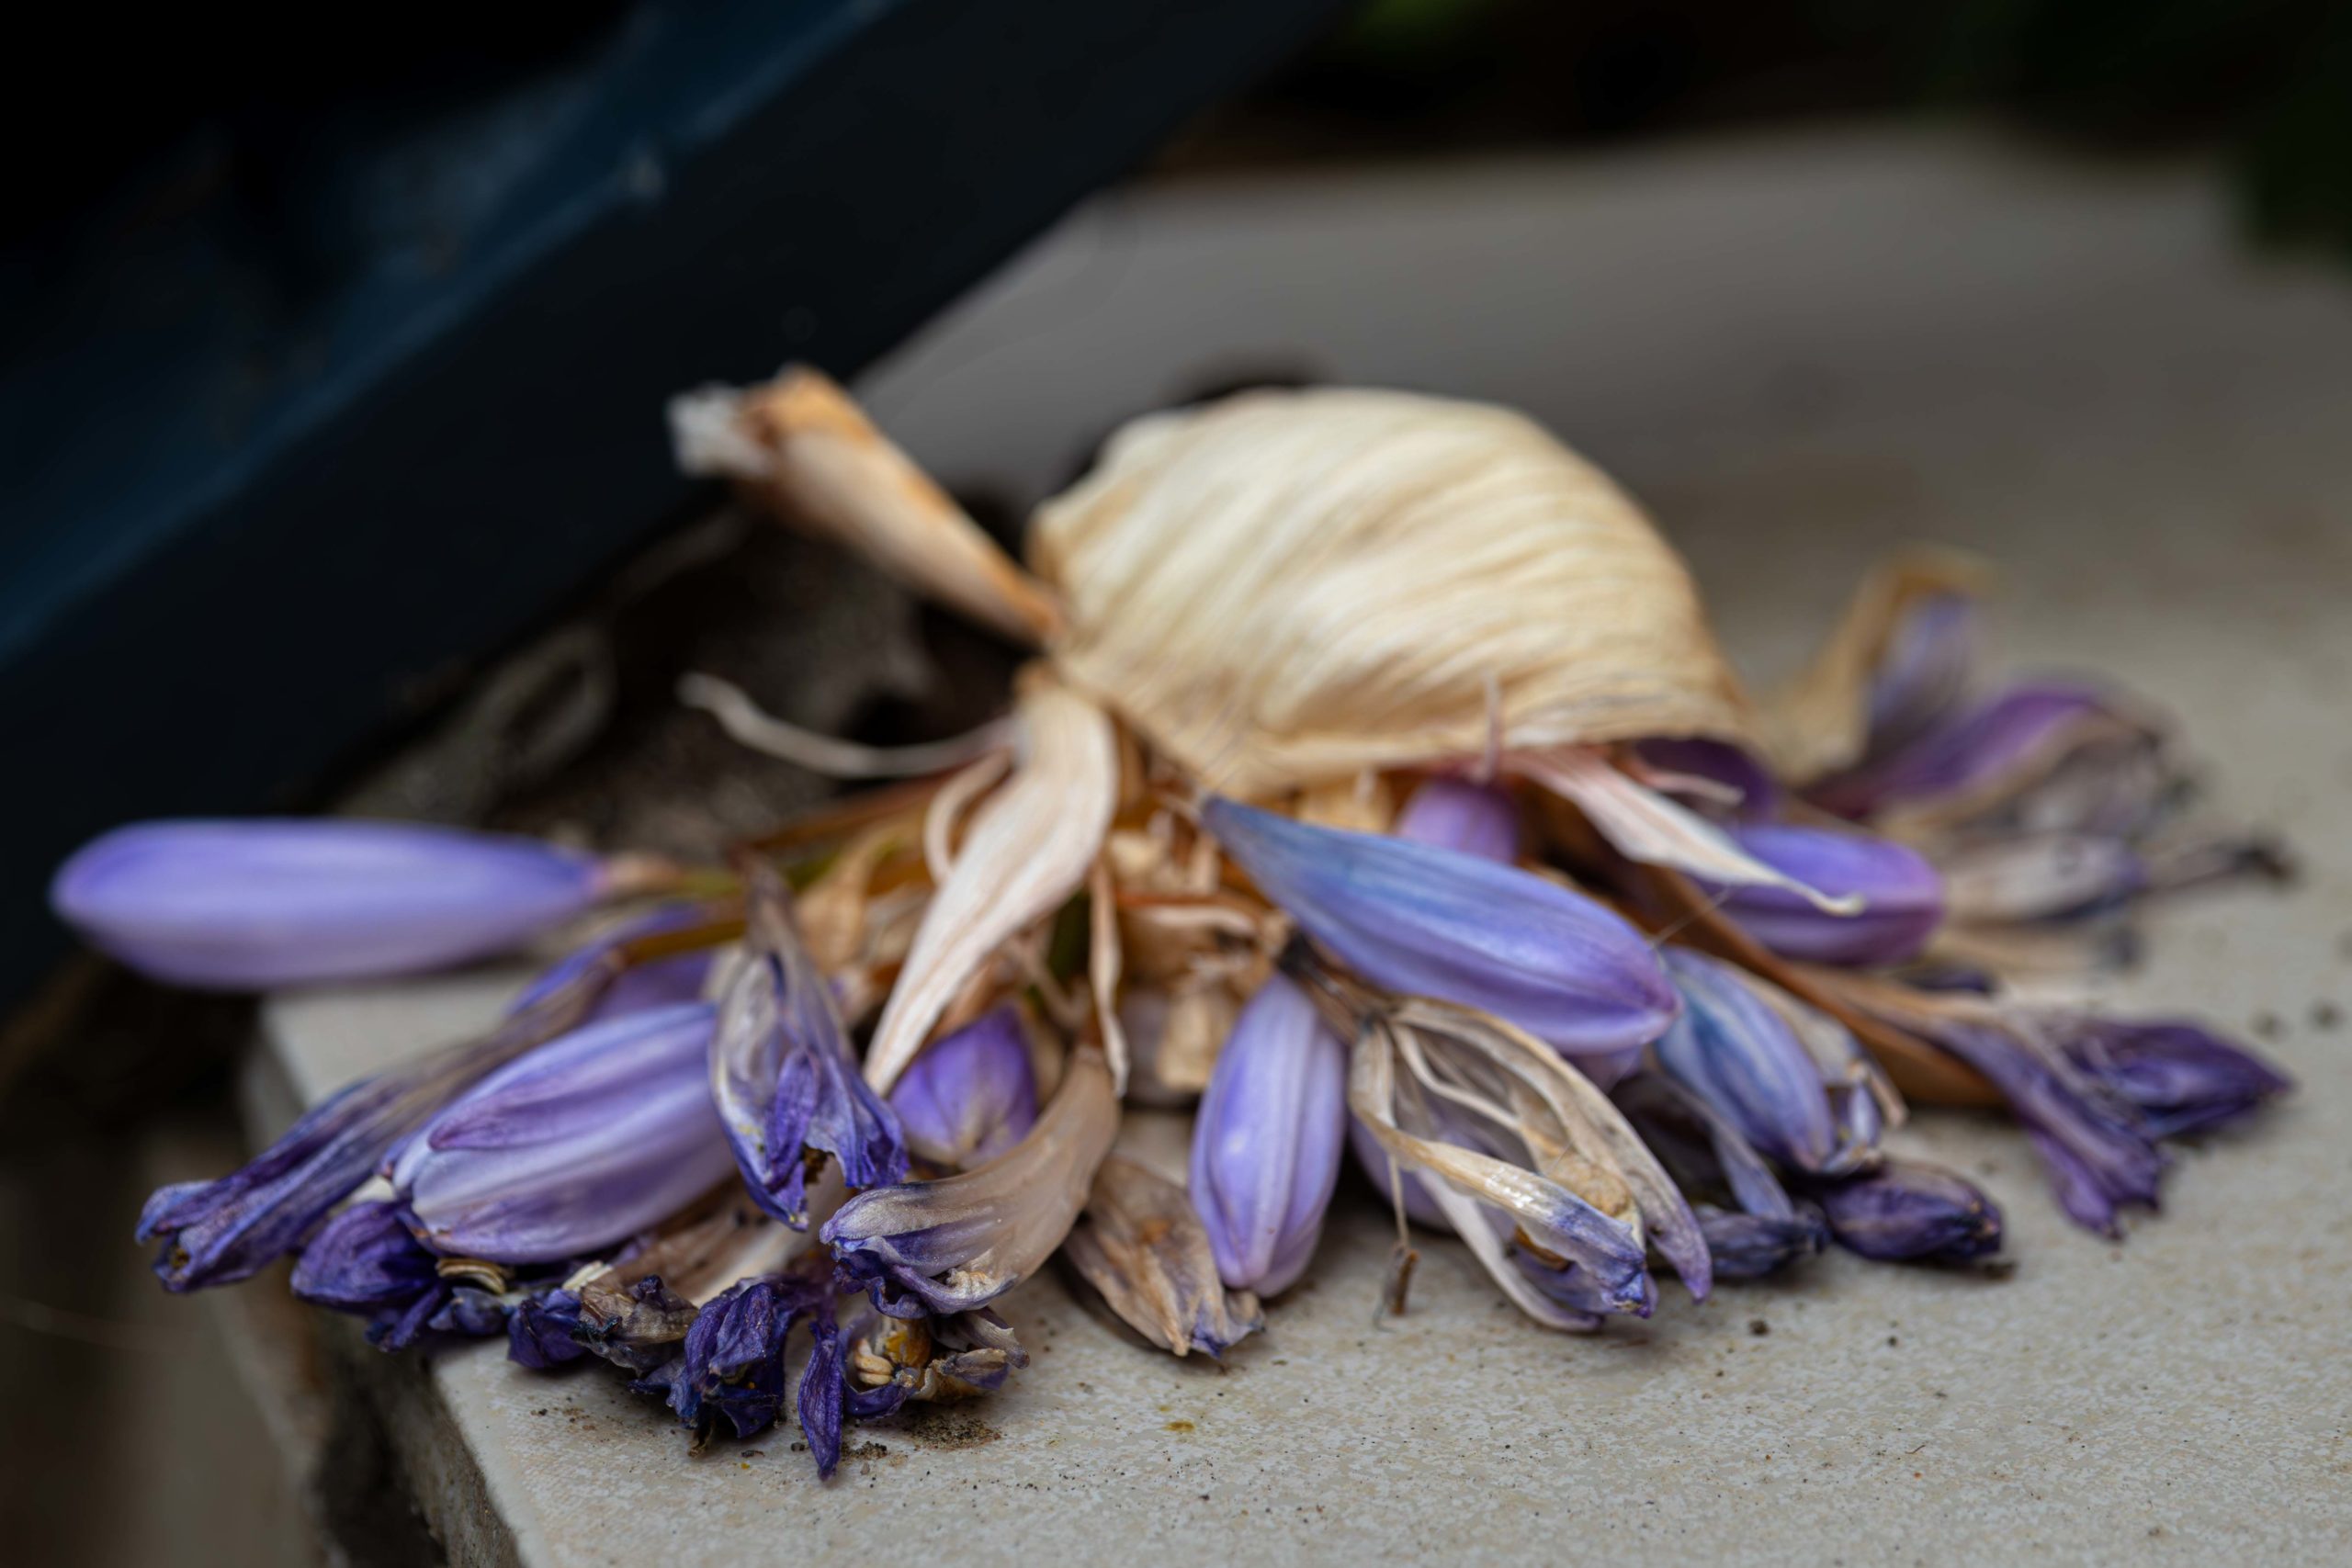 A purple agapanthus flower that never flowered properly, lying on the ground